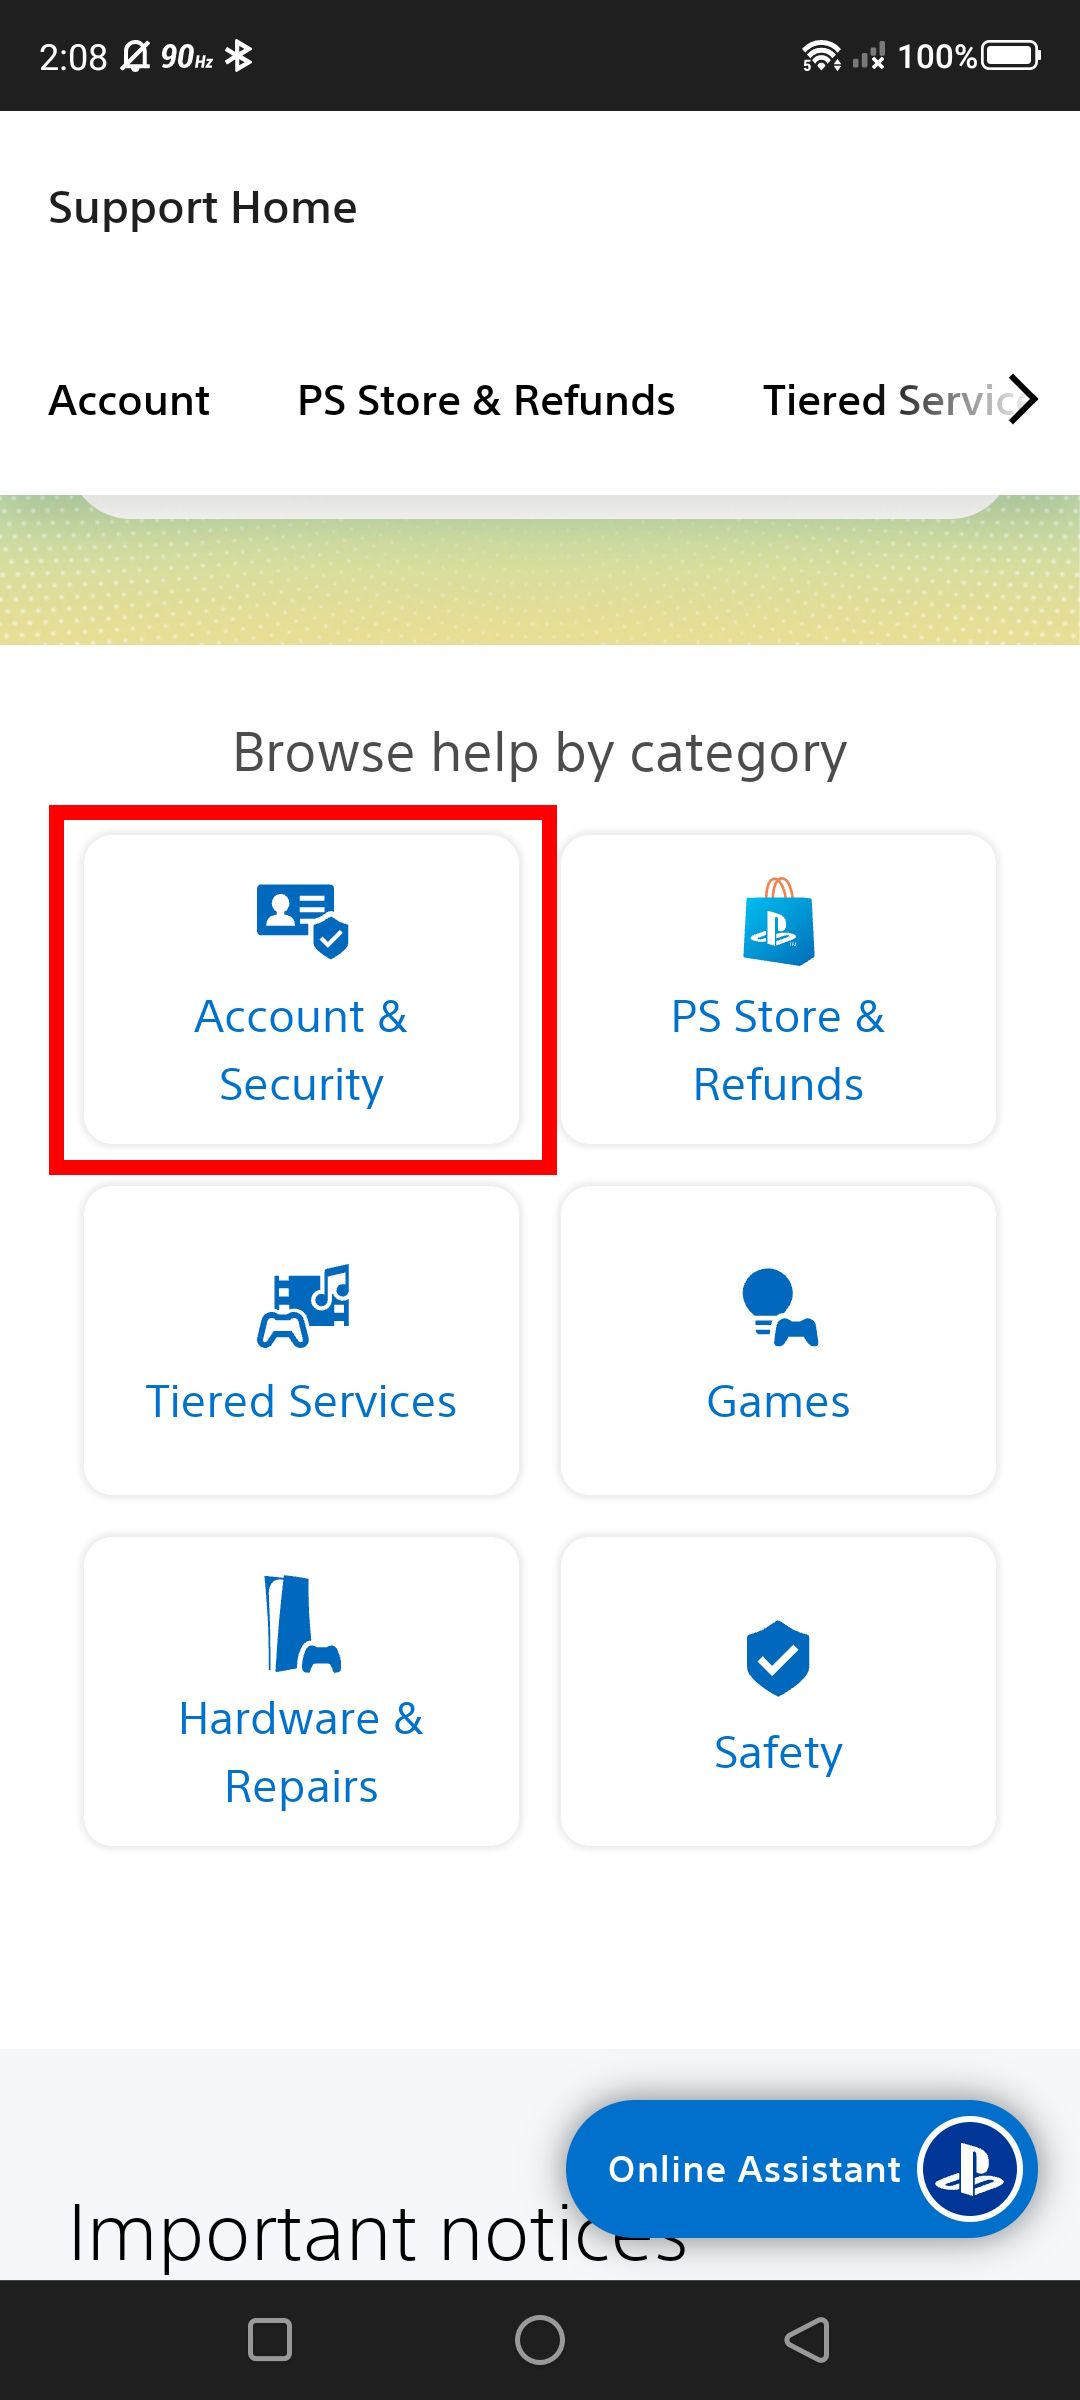 Red box outline over Account & Security on the PlayStation Support page